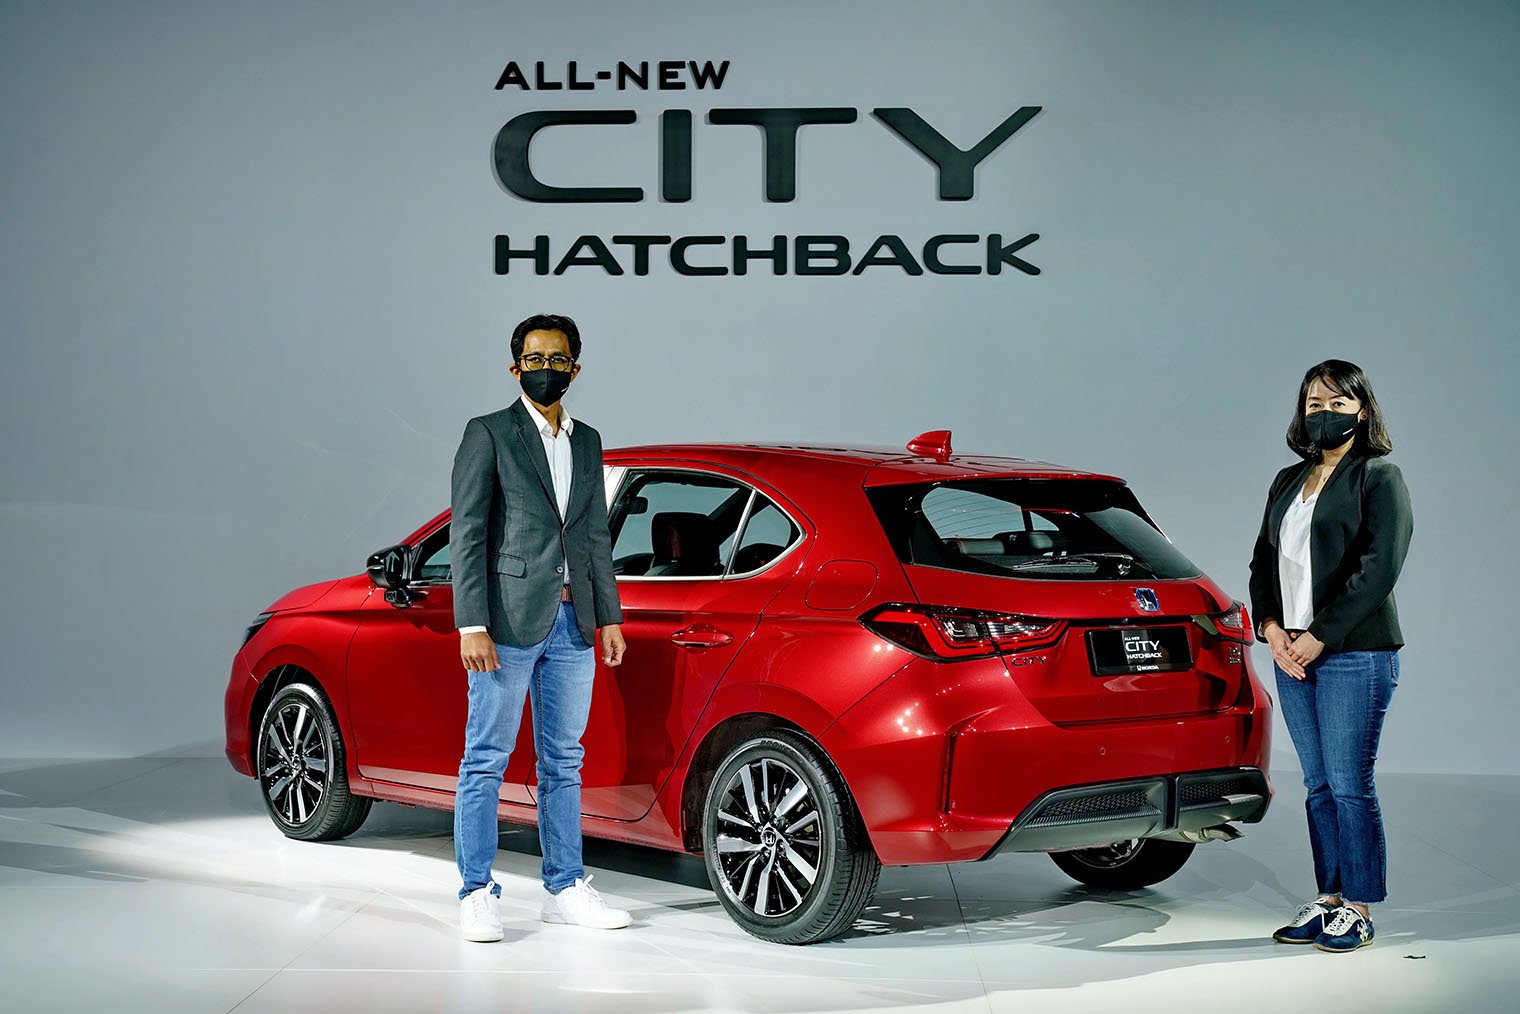 (From left) Mr. Sarly Adle Sarkum, President & Chief Operating Officer of Honda Malaysia Sdn. Bhd., and Ms. Madoka Chujo, Managing Director & Chief Executive Officer of Honda Malaysia Sdn. Bhd. at the Launch of the All-New City Hatchback.